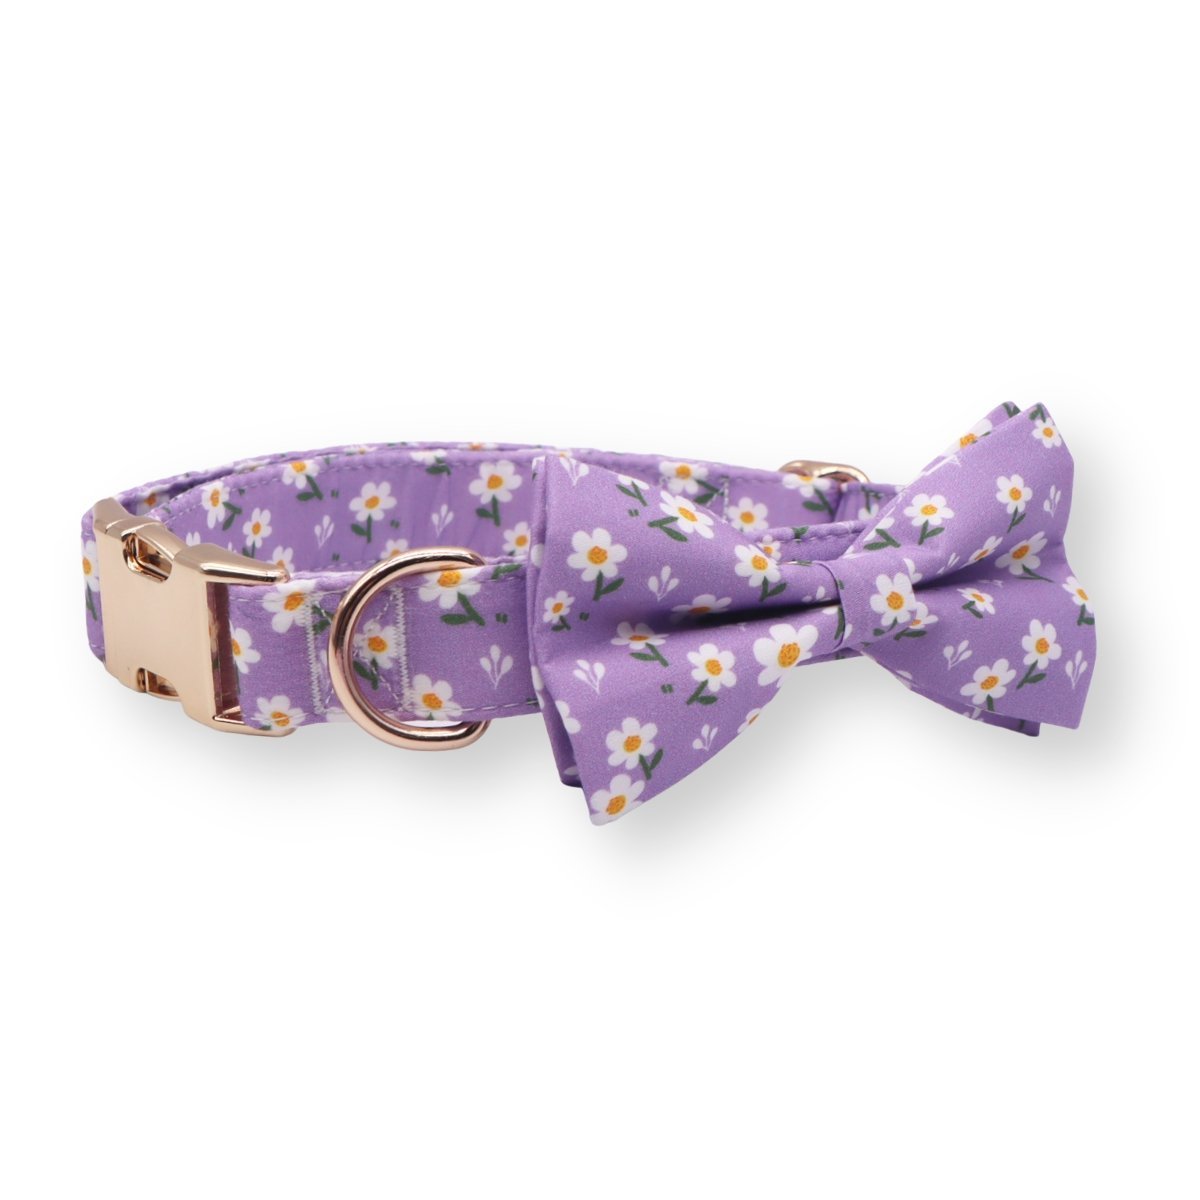 Luxury Personalized Dog Collars - 9 Cotton Voile Styles Available